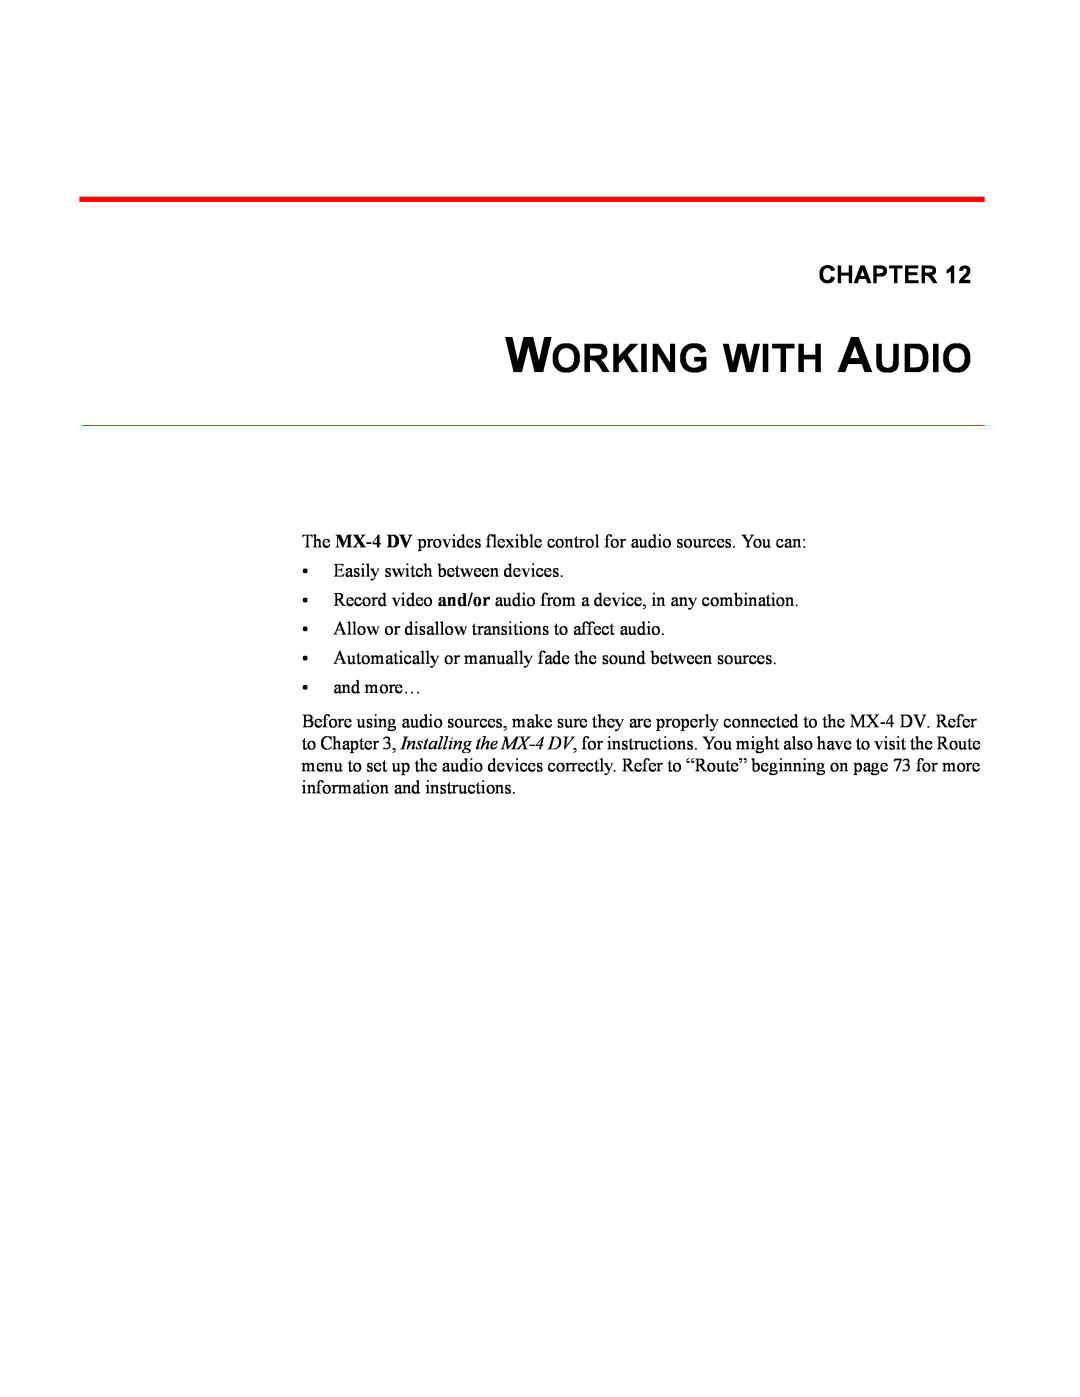 FOCUS Enhancements MX-4DV manual Working With Audio, Chapter 